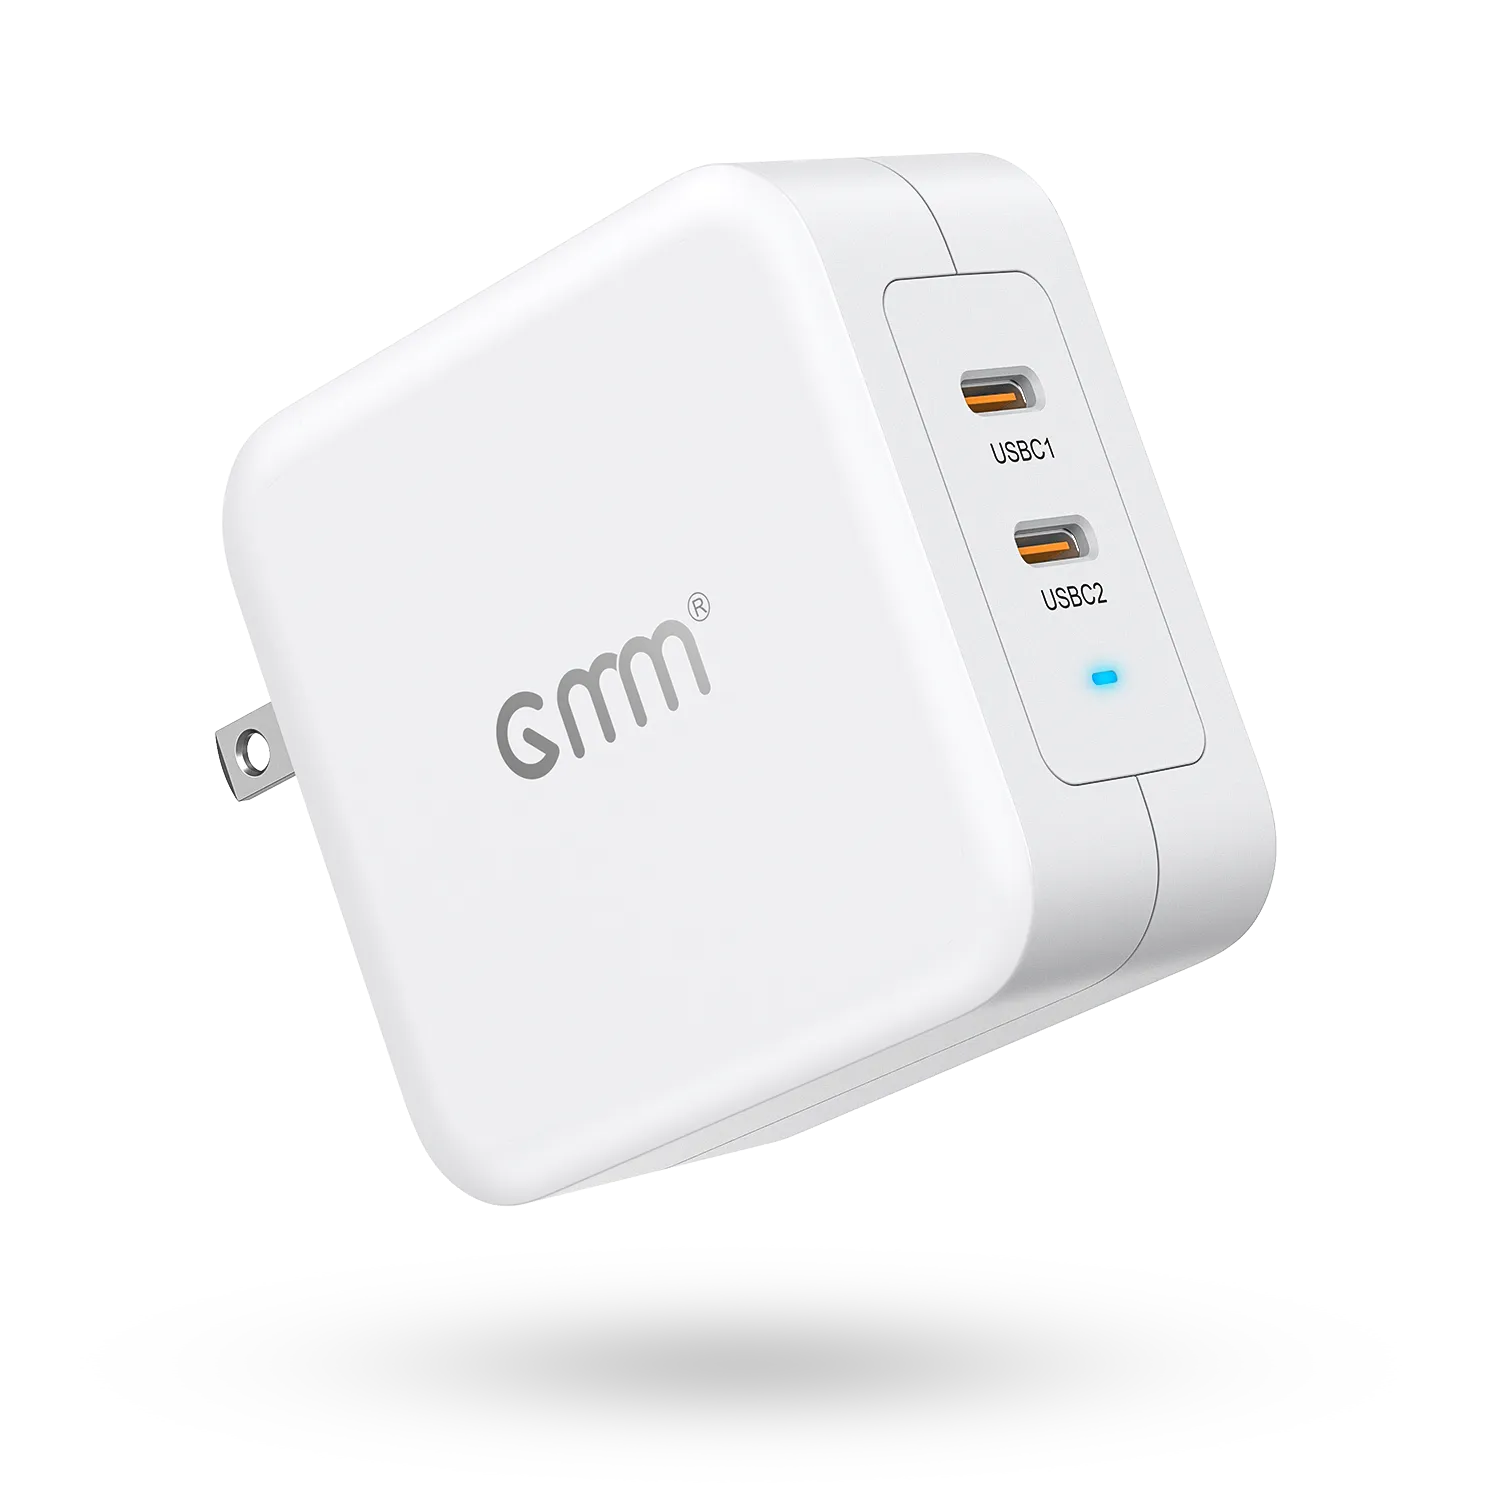 GMM 100W USB C Charger Multiport for MacBooks